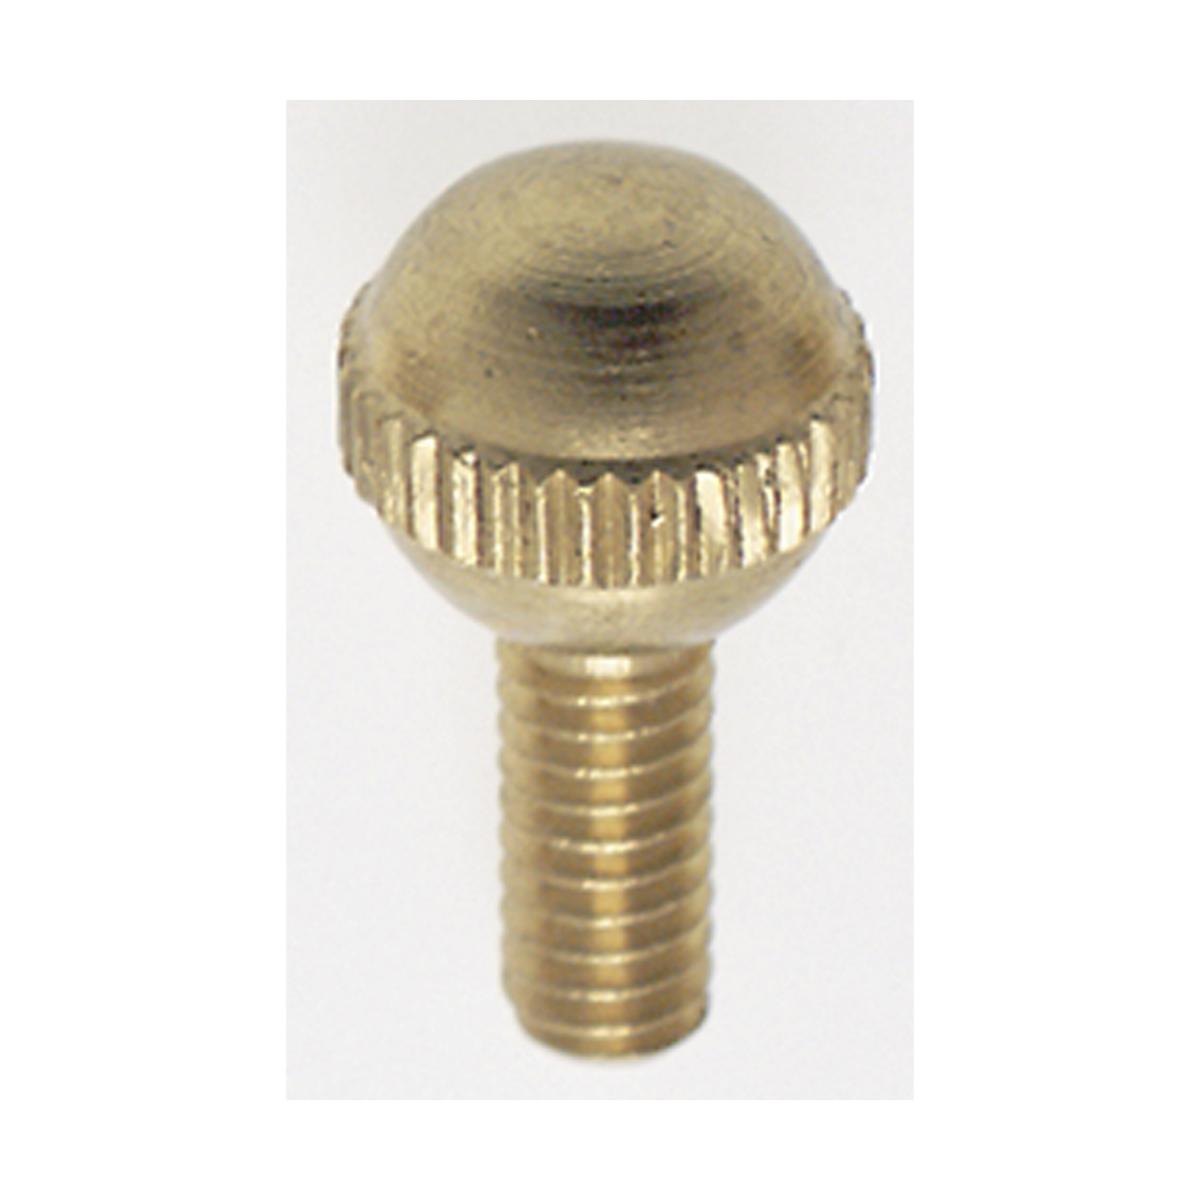 Satco 90-035 Solid Brass Thumb Screw Burnished and Lacquered 8/32 Ball Head 3/8" Length